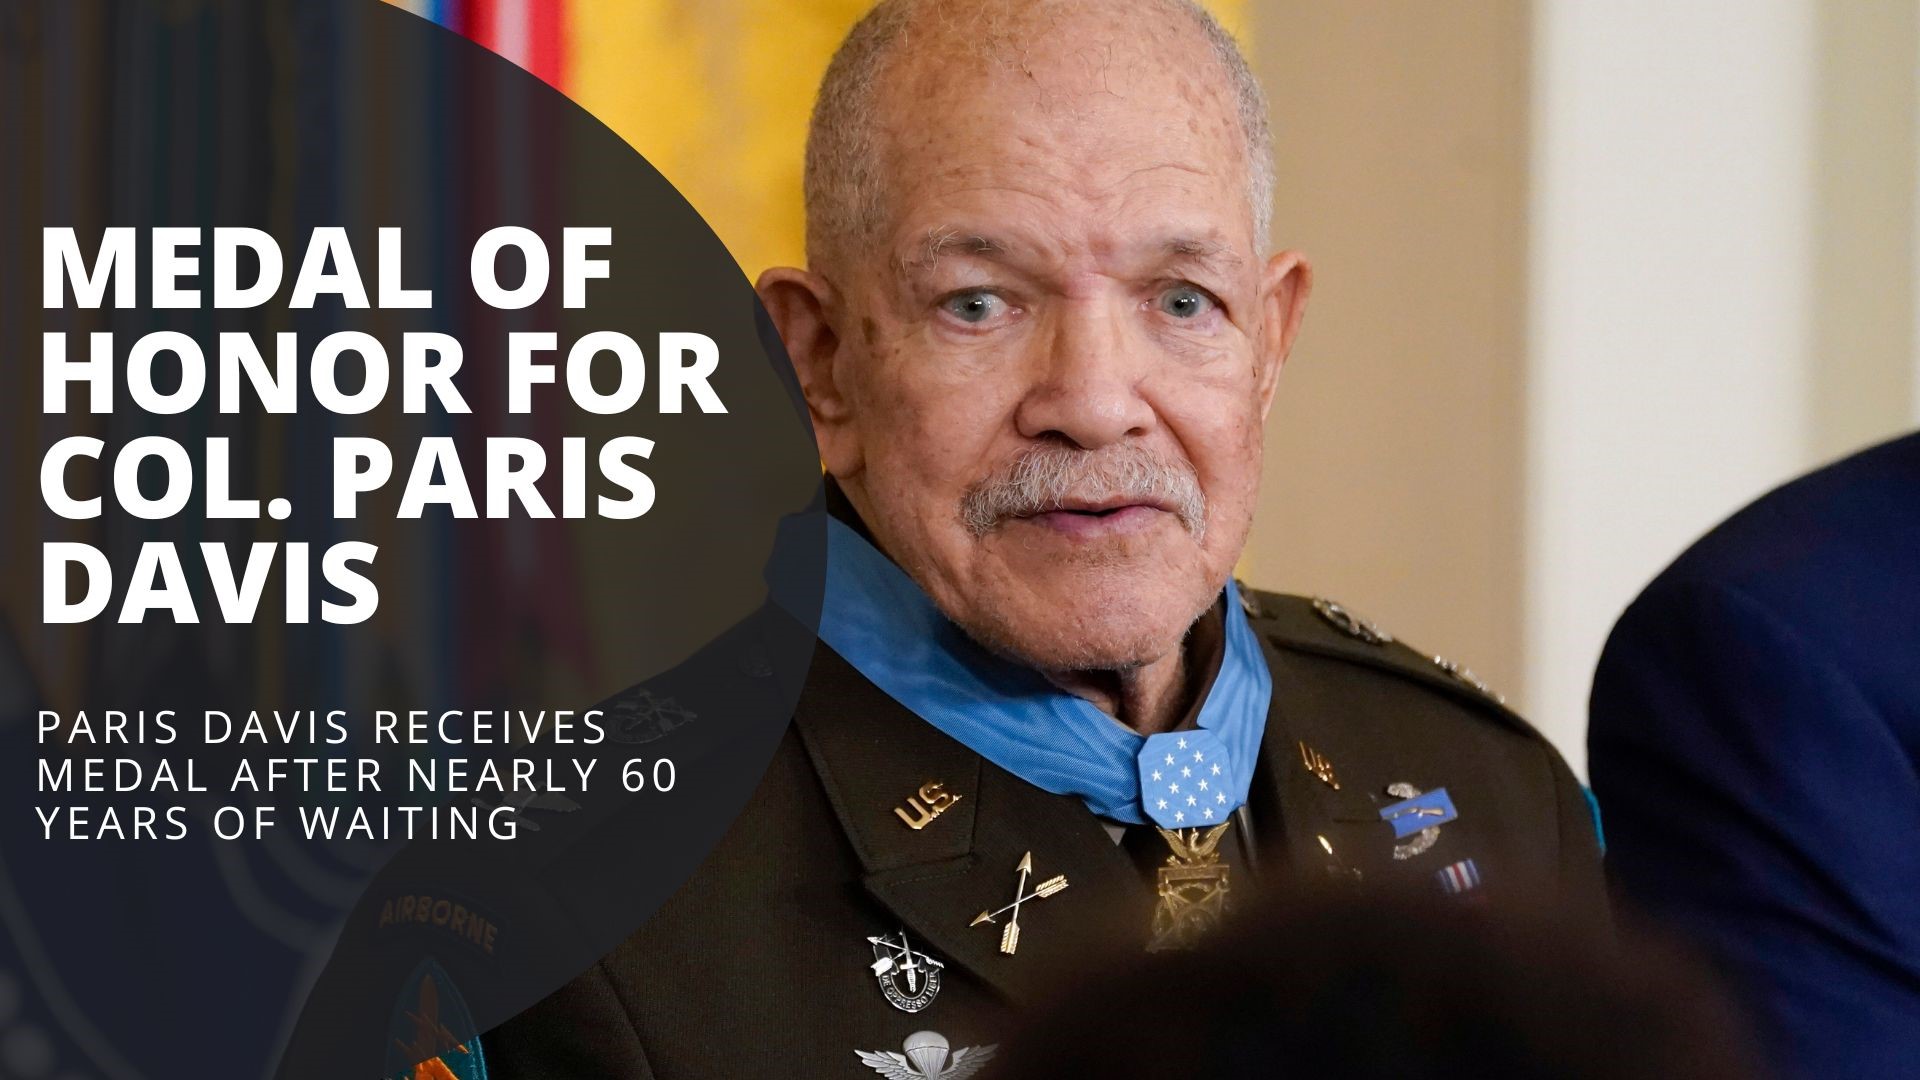 President Biden awards the Medal of Honor to Special Forces Col. Paris Davis for his service in the Vietnam War. He waited nearly 60 years due to "lost" paperwork.